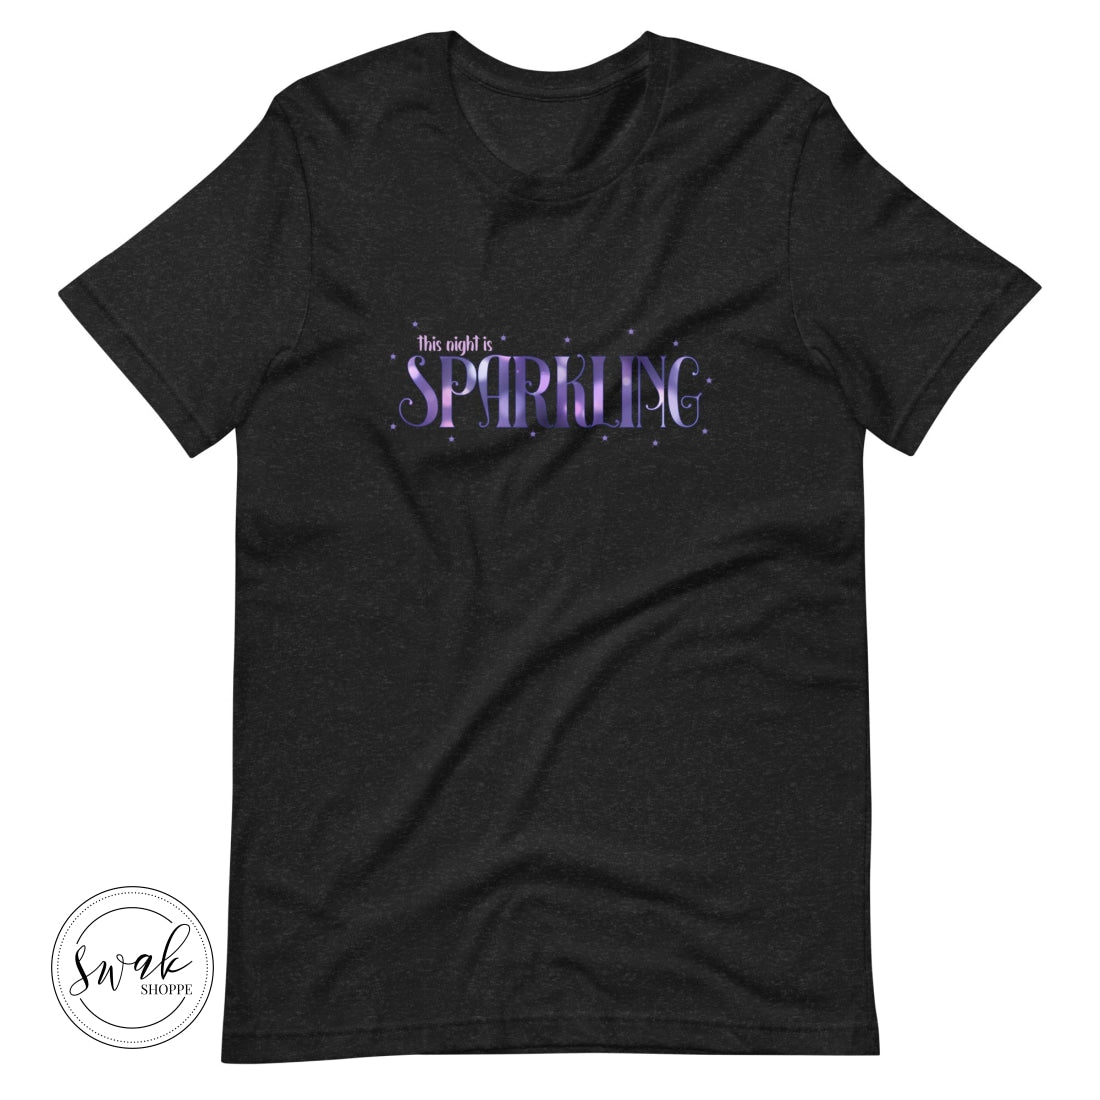 This Night Is Sparkling Unisex T-Shirt